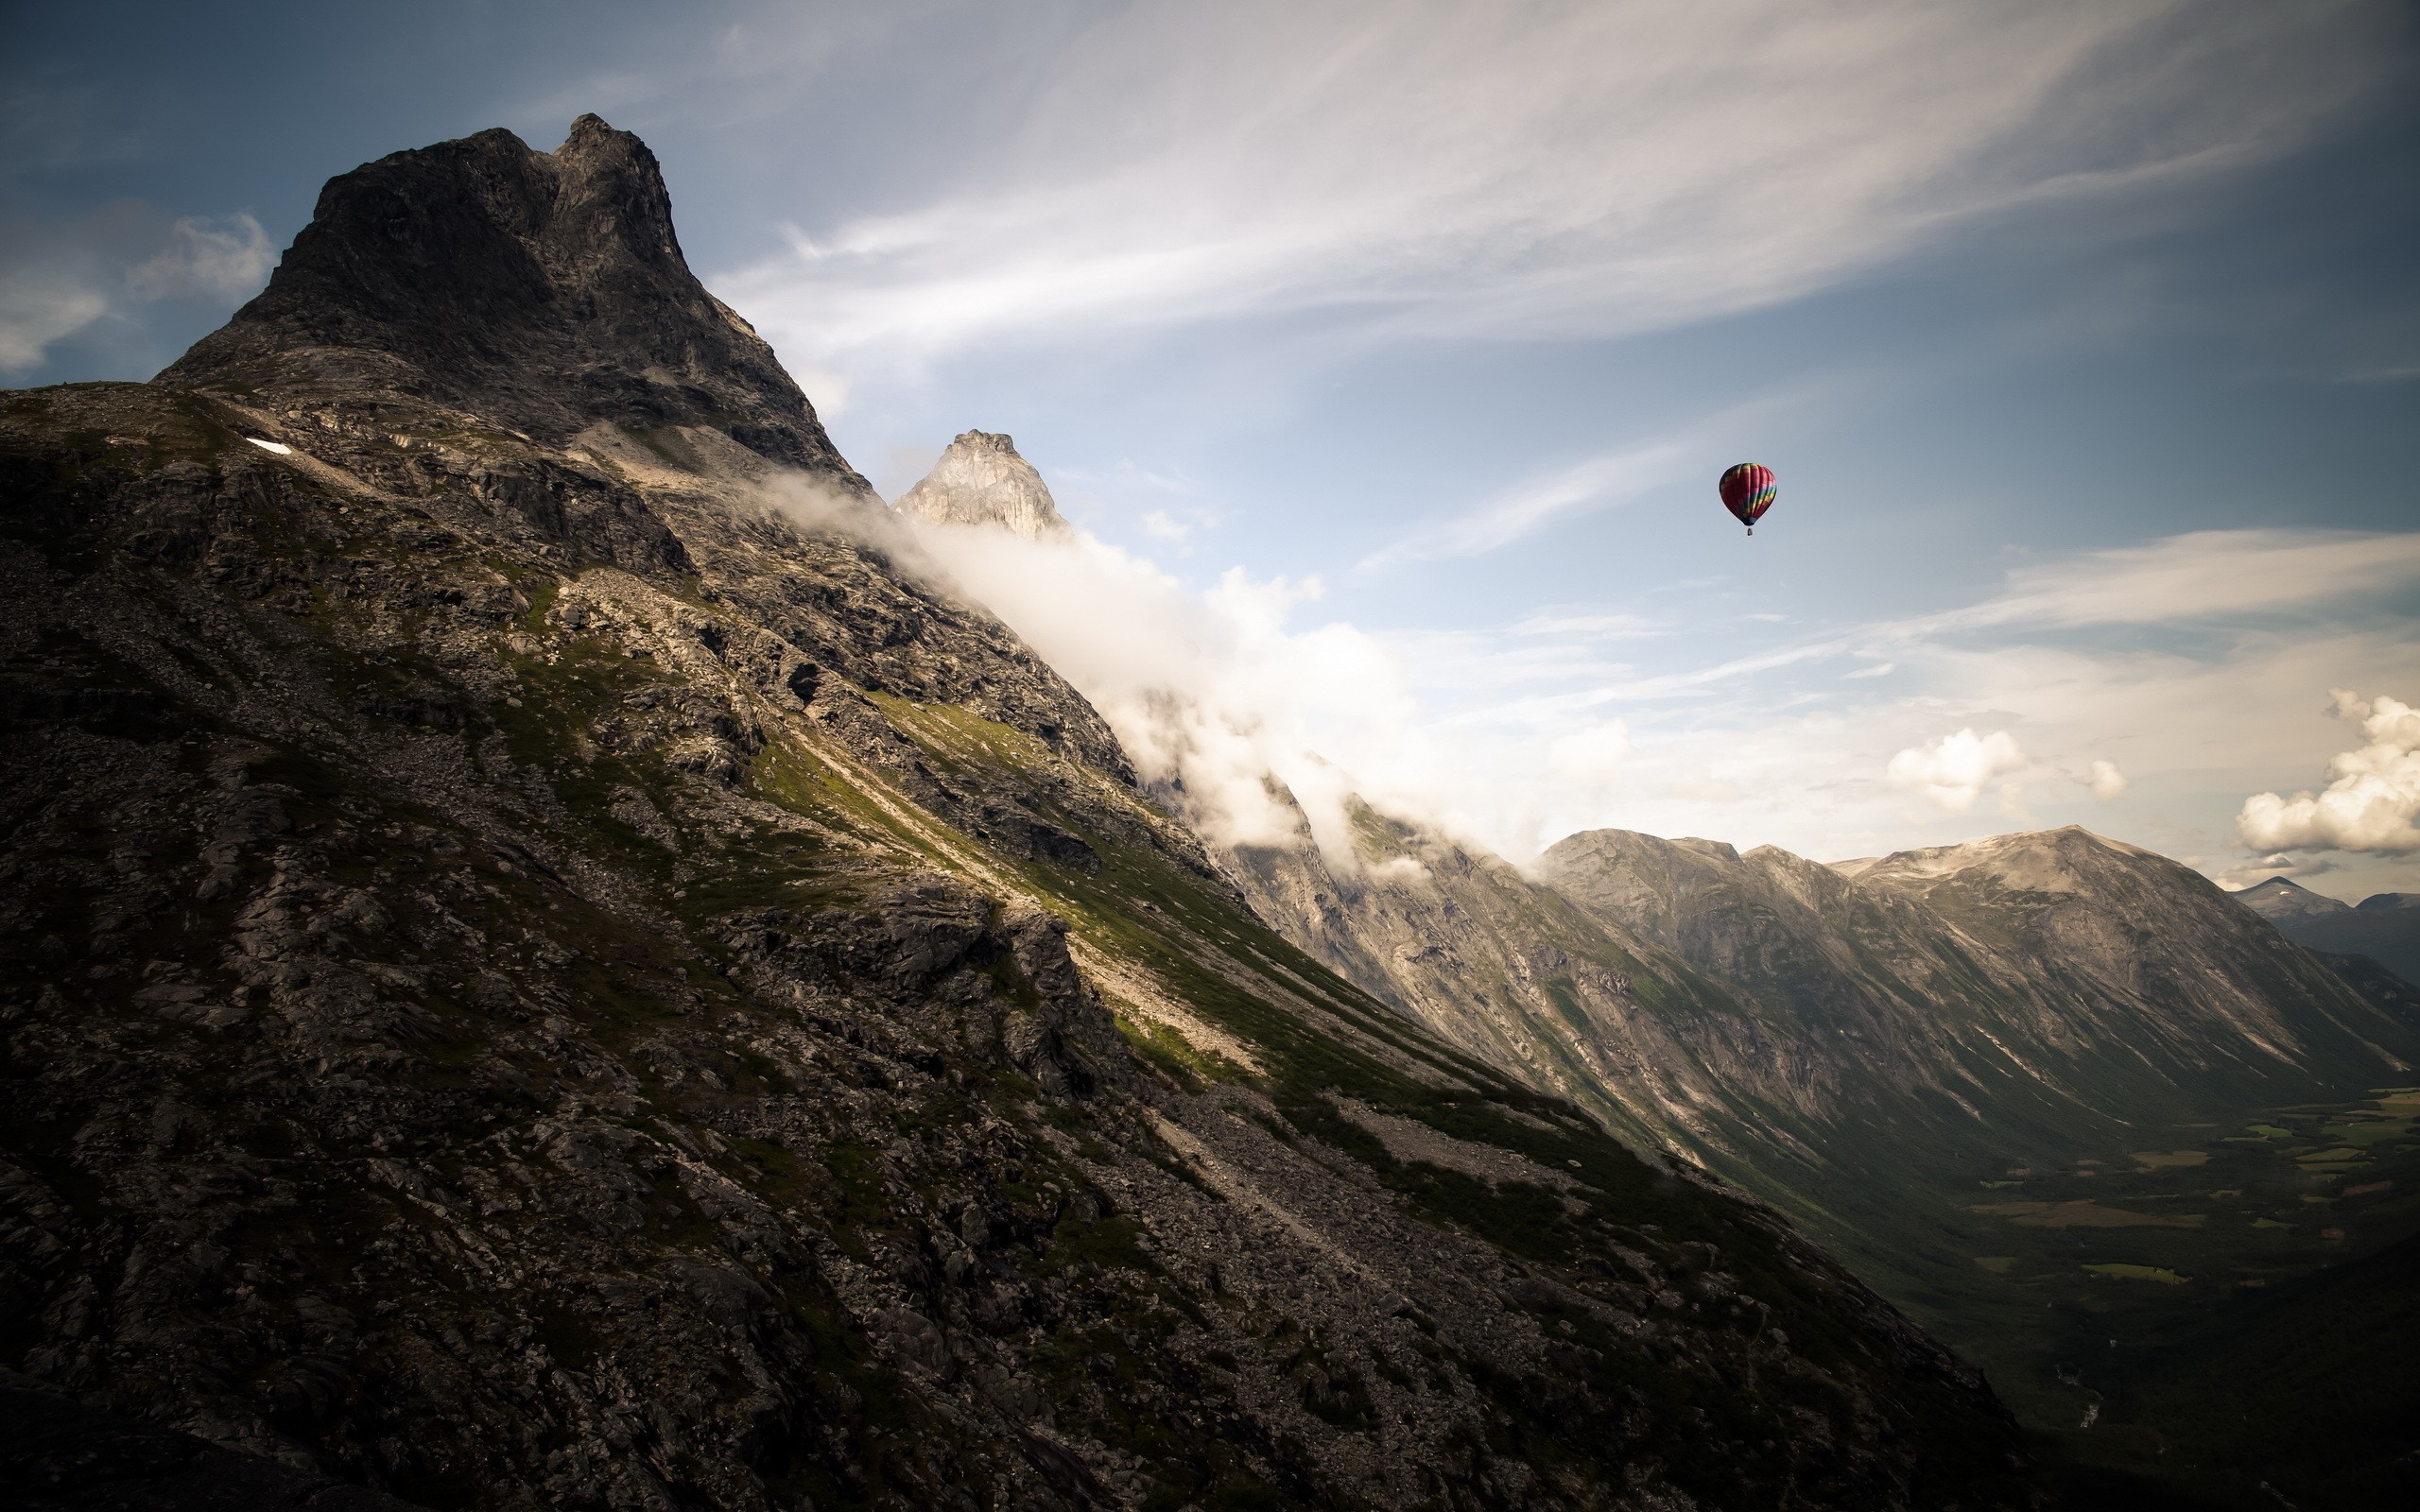 General 2560x1600 landscape nature hot air balloons mountains vehicle